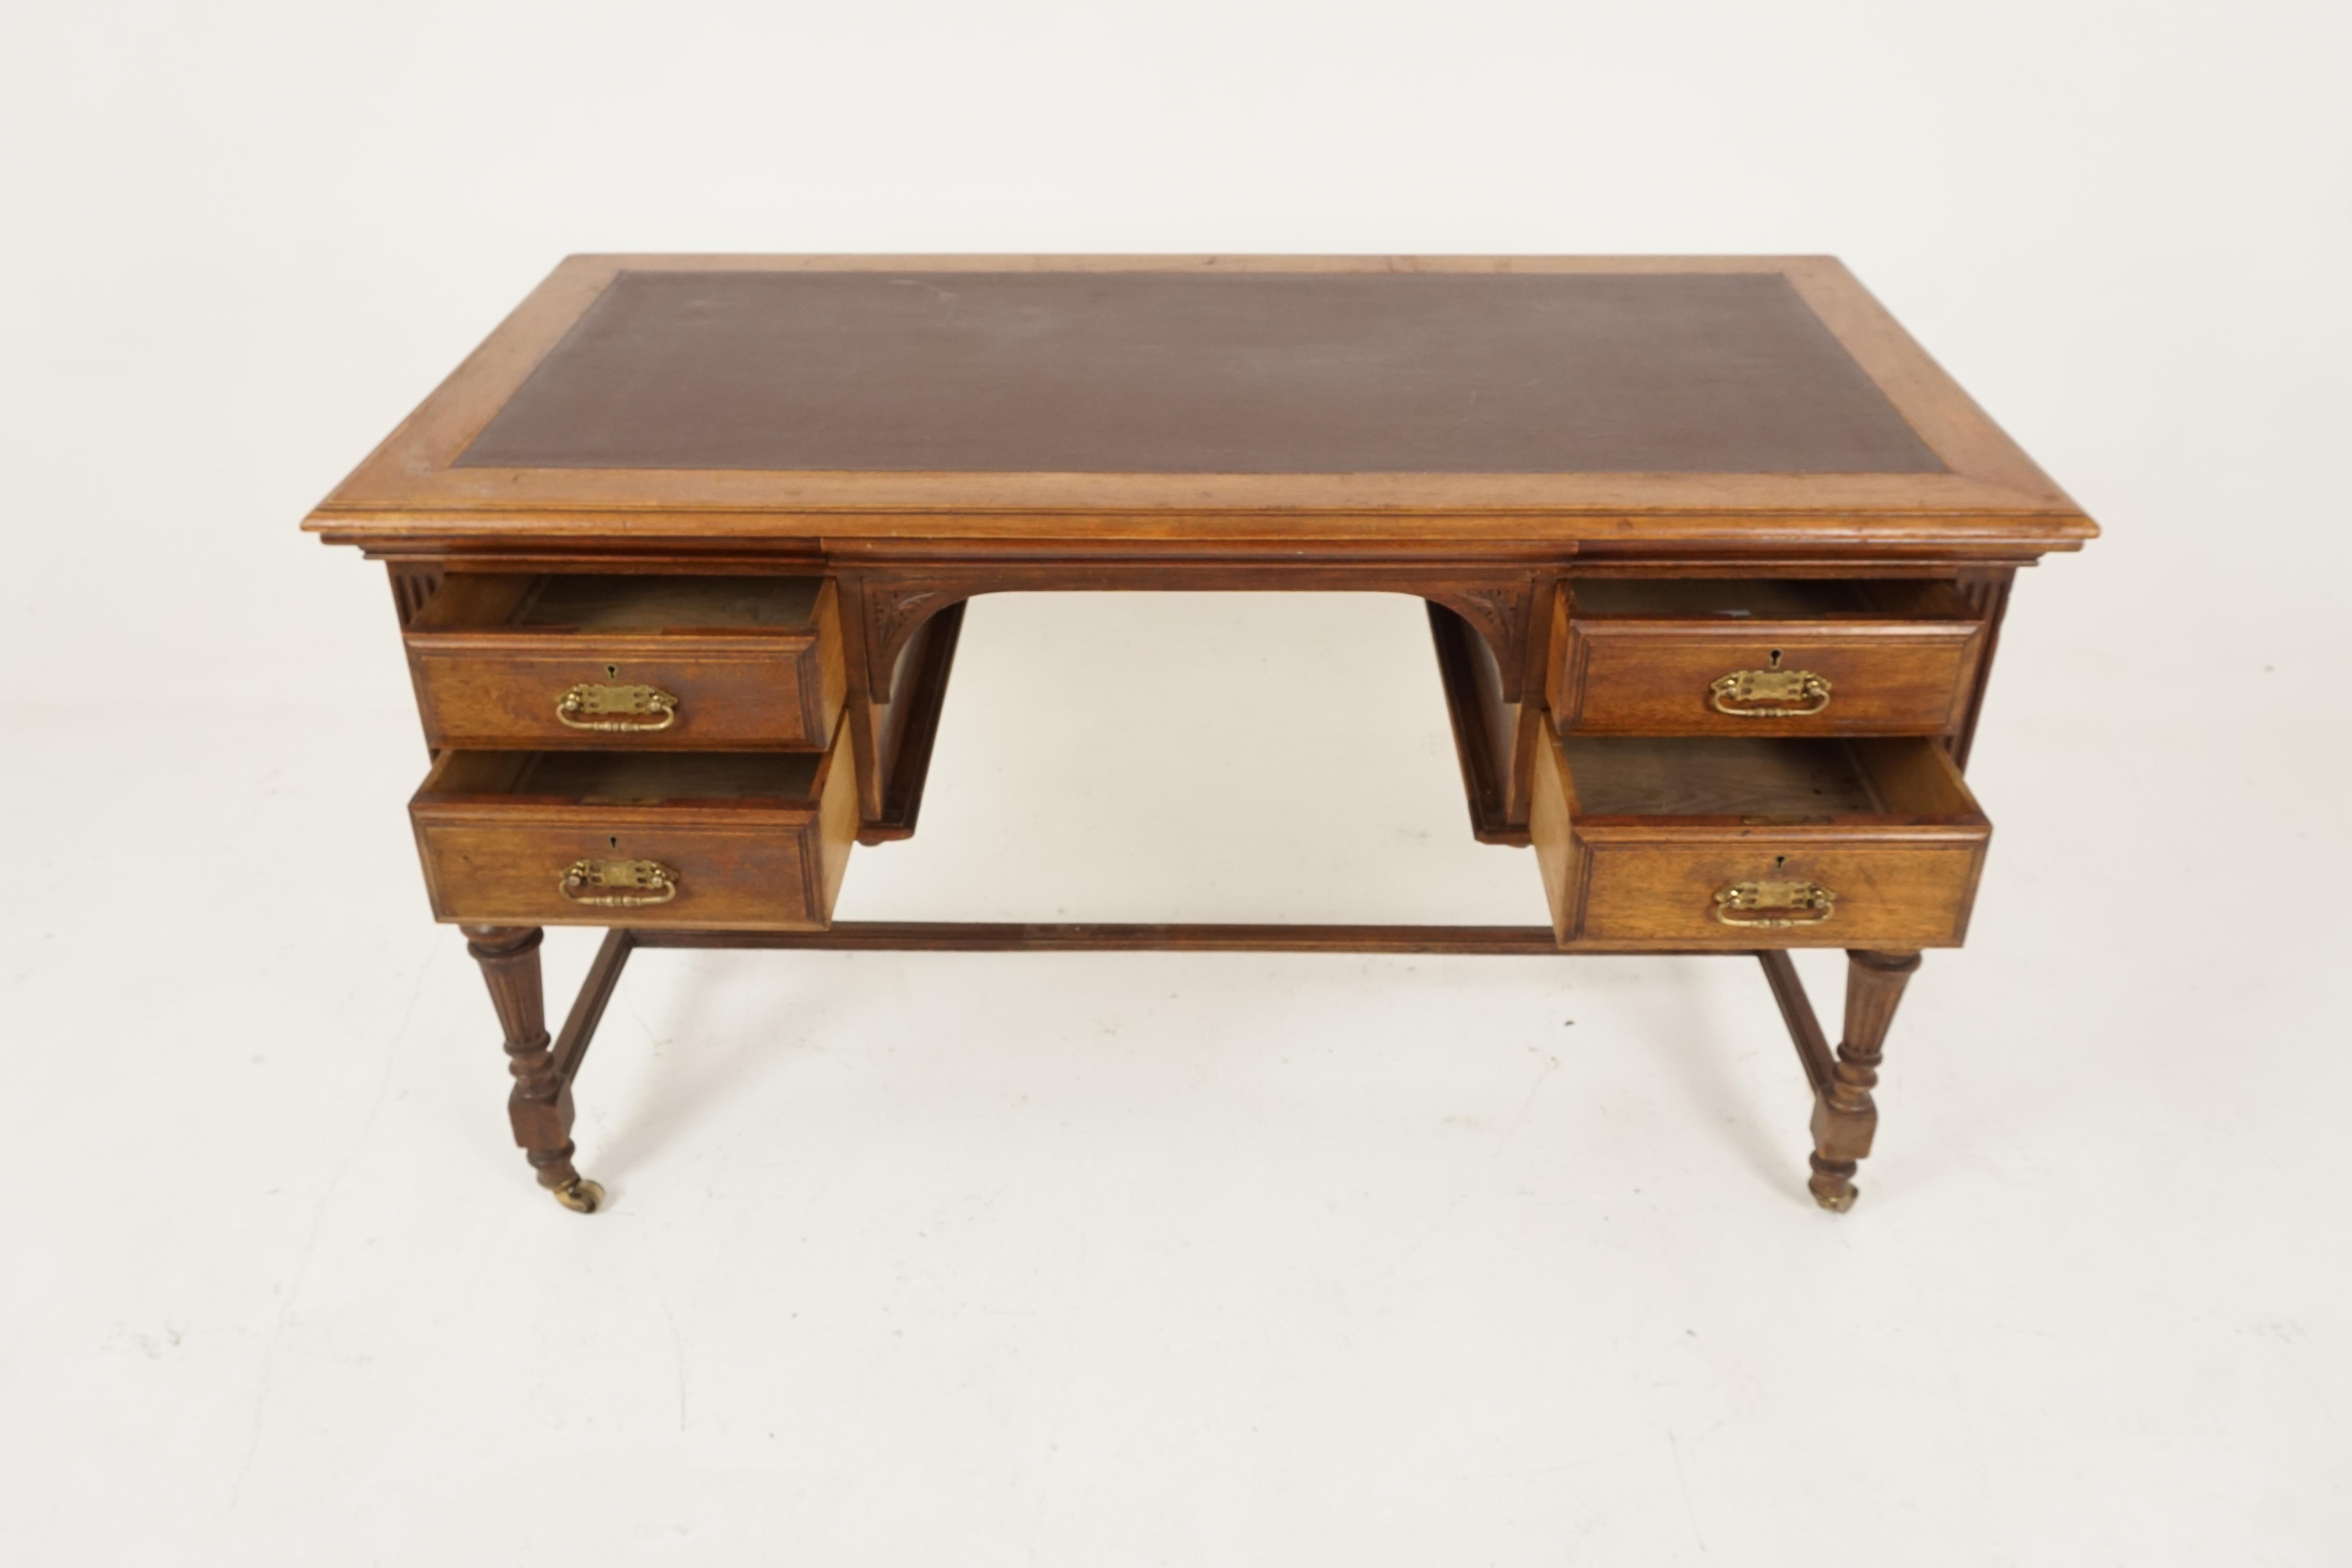 Antique Victorian desk, Walnut writing desk, Scotland 1890, B1264

Scotland, 1890
Solid Walnut
Original finish
Rectangular moulded top
The top insert with a vinyl writing surface
Slide out adjustable writing tablet to the center
Flanked by a pair of